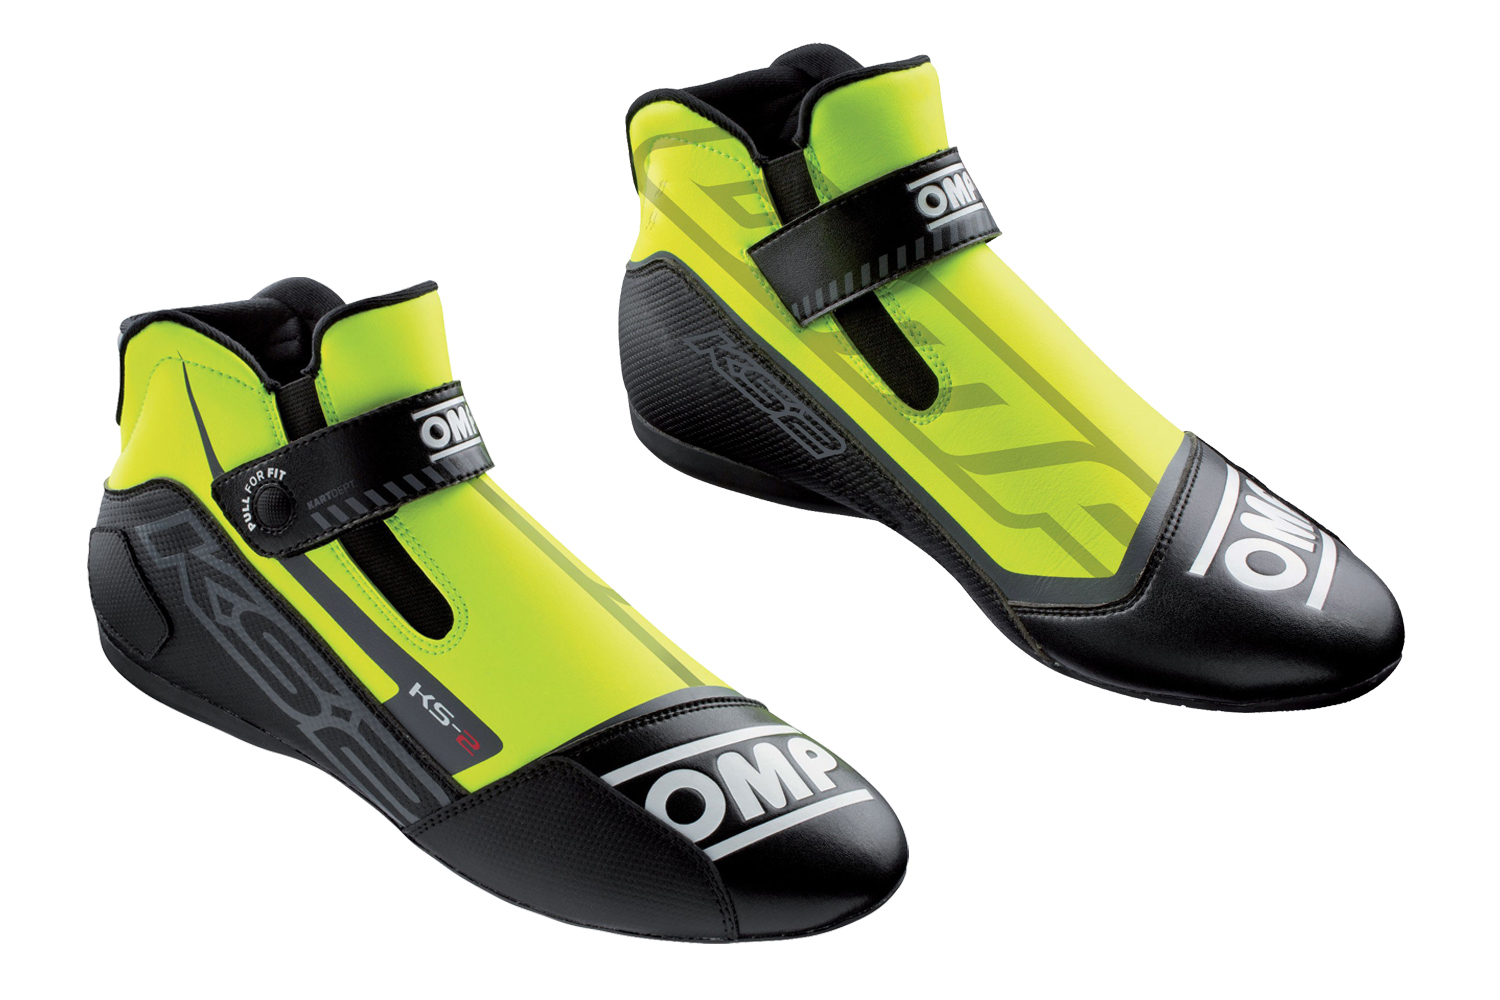 OMP Racing IC82505934 Driving Shoe, KS-2, Mid-Top, FIA Approved, Suede Leather Outer, Fire Retardant Fabric Inner, Fluorescent Yellow / Black, Euro Size 34, Pair